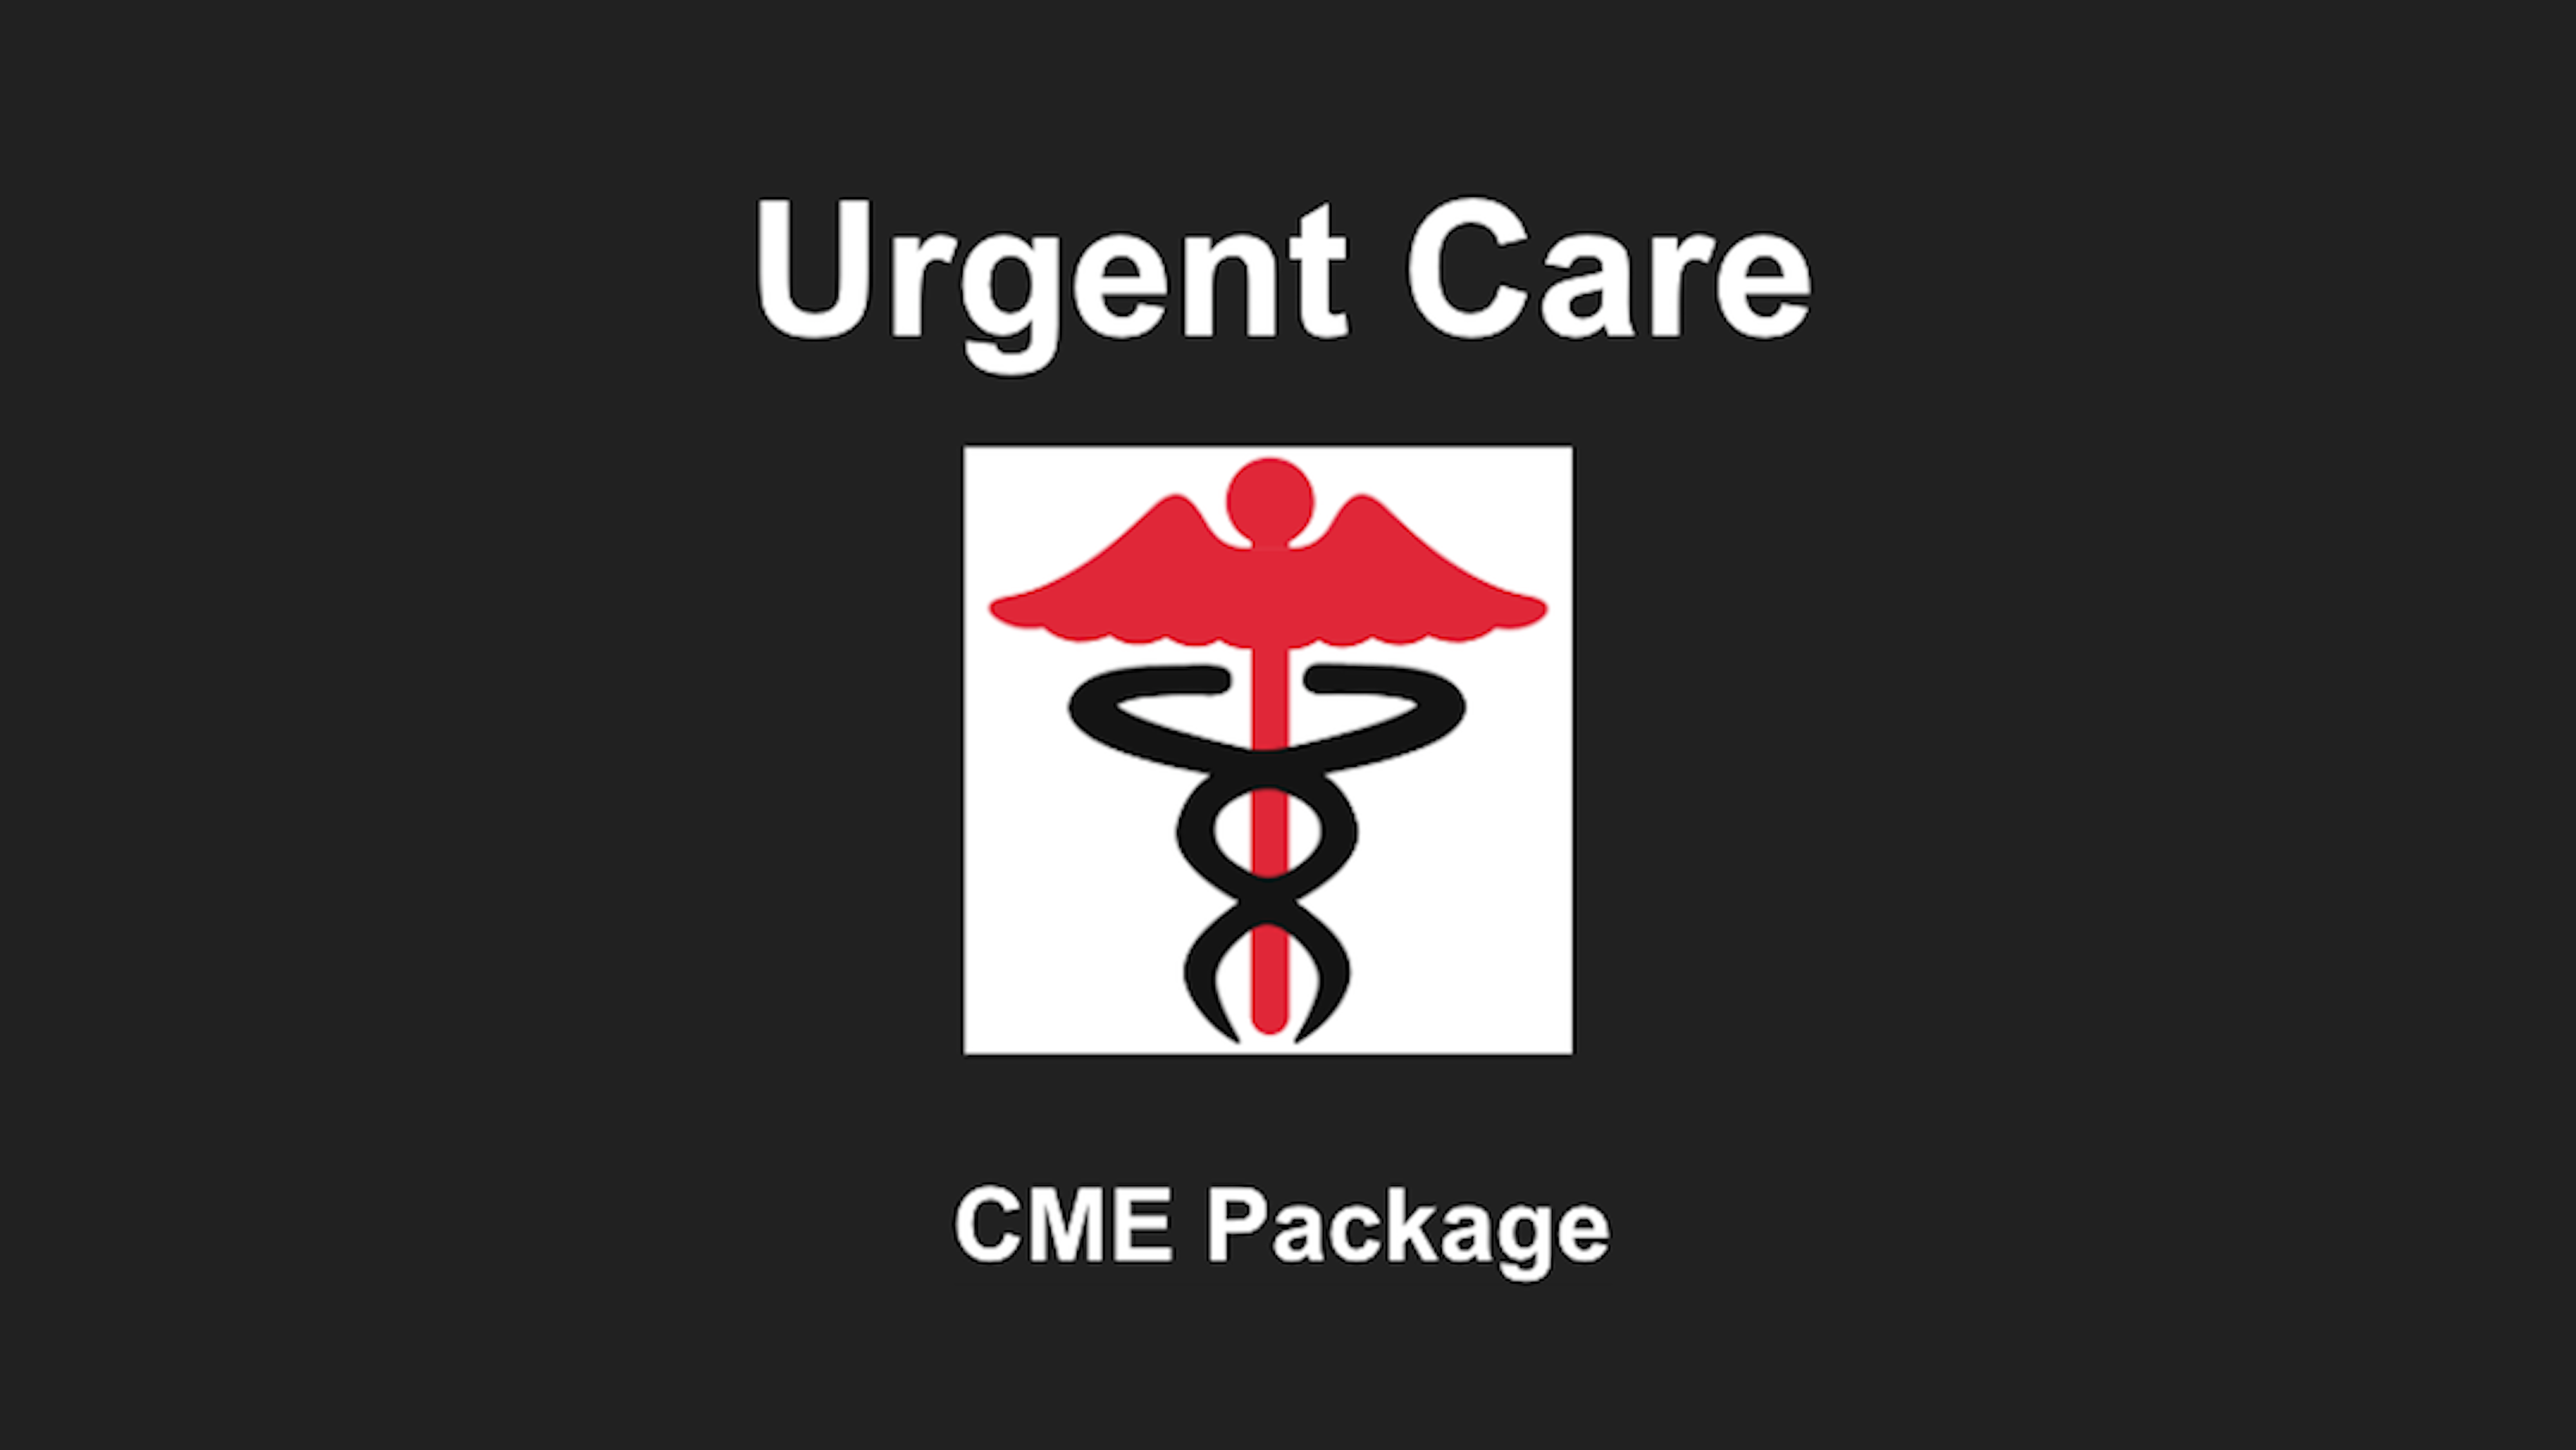 Urgent Care Review Course CME Package - CME Medical Review